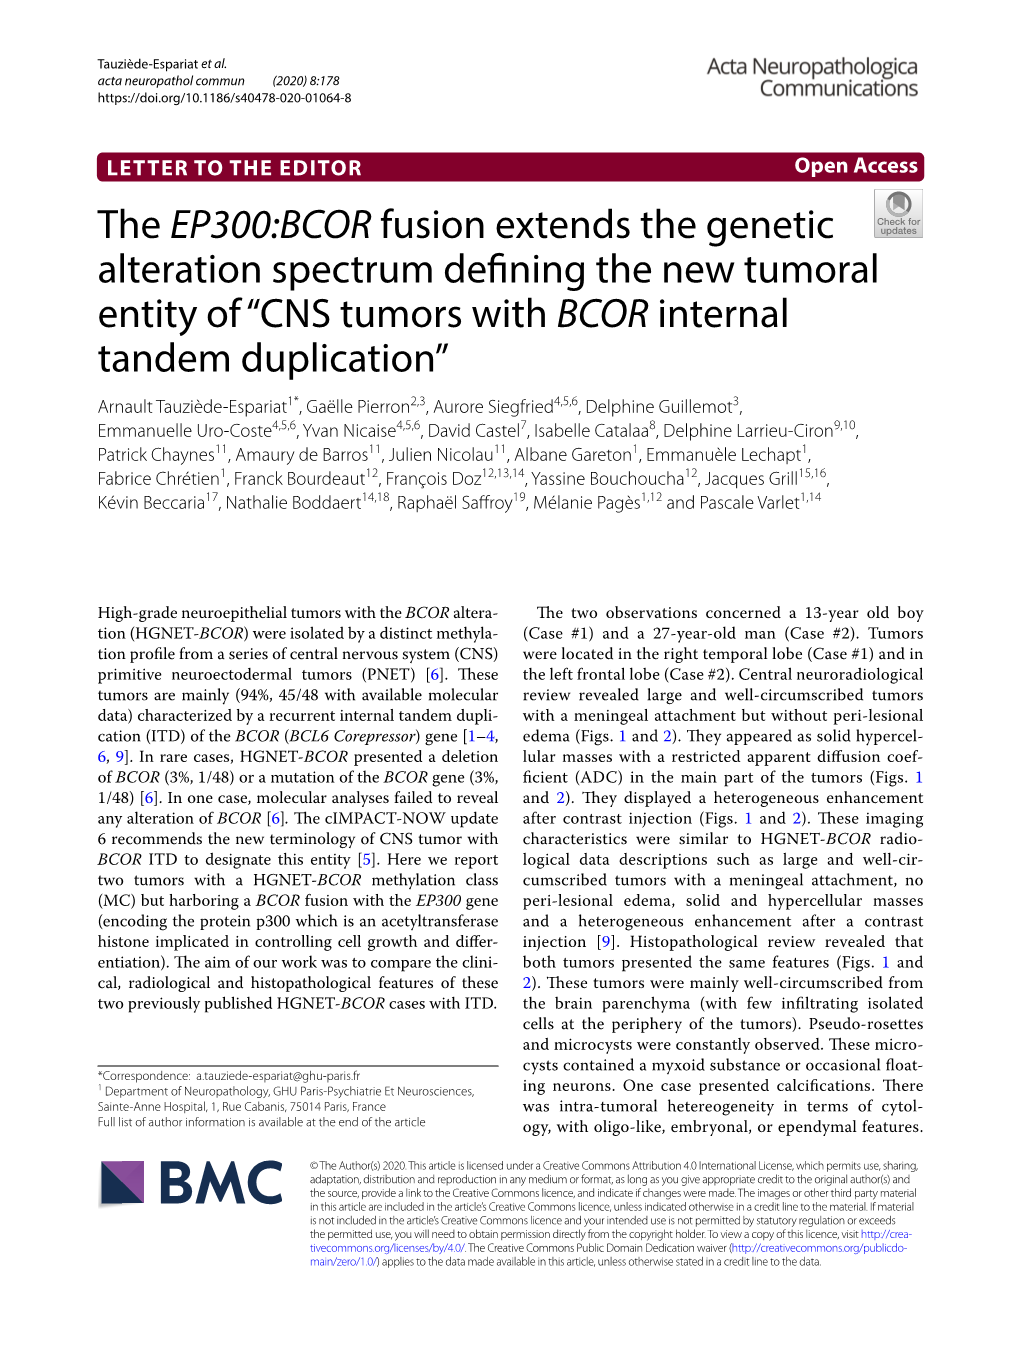 The EP300:BCOR Fusion Extends the Genetic Alteration Spectrum Defining